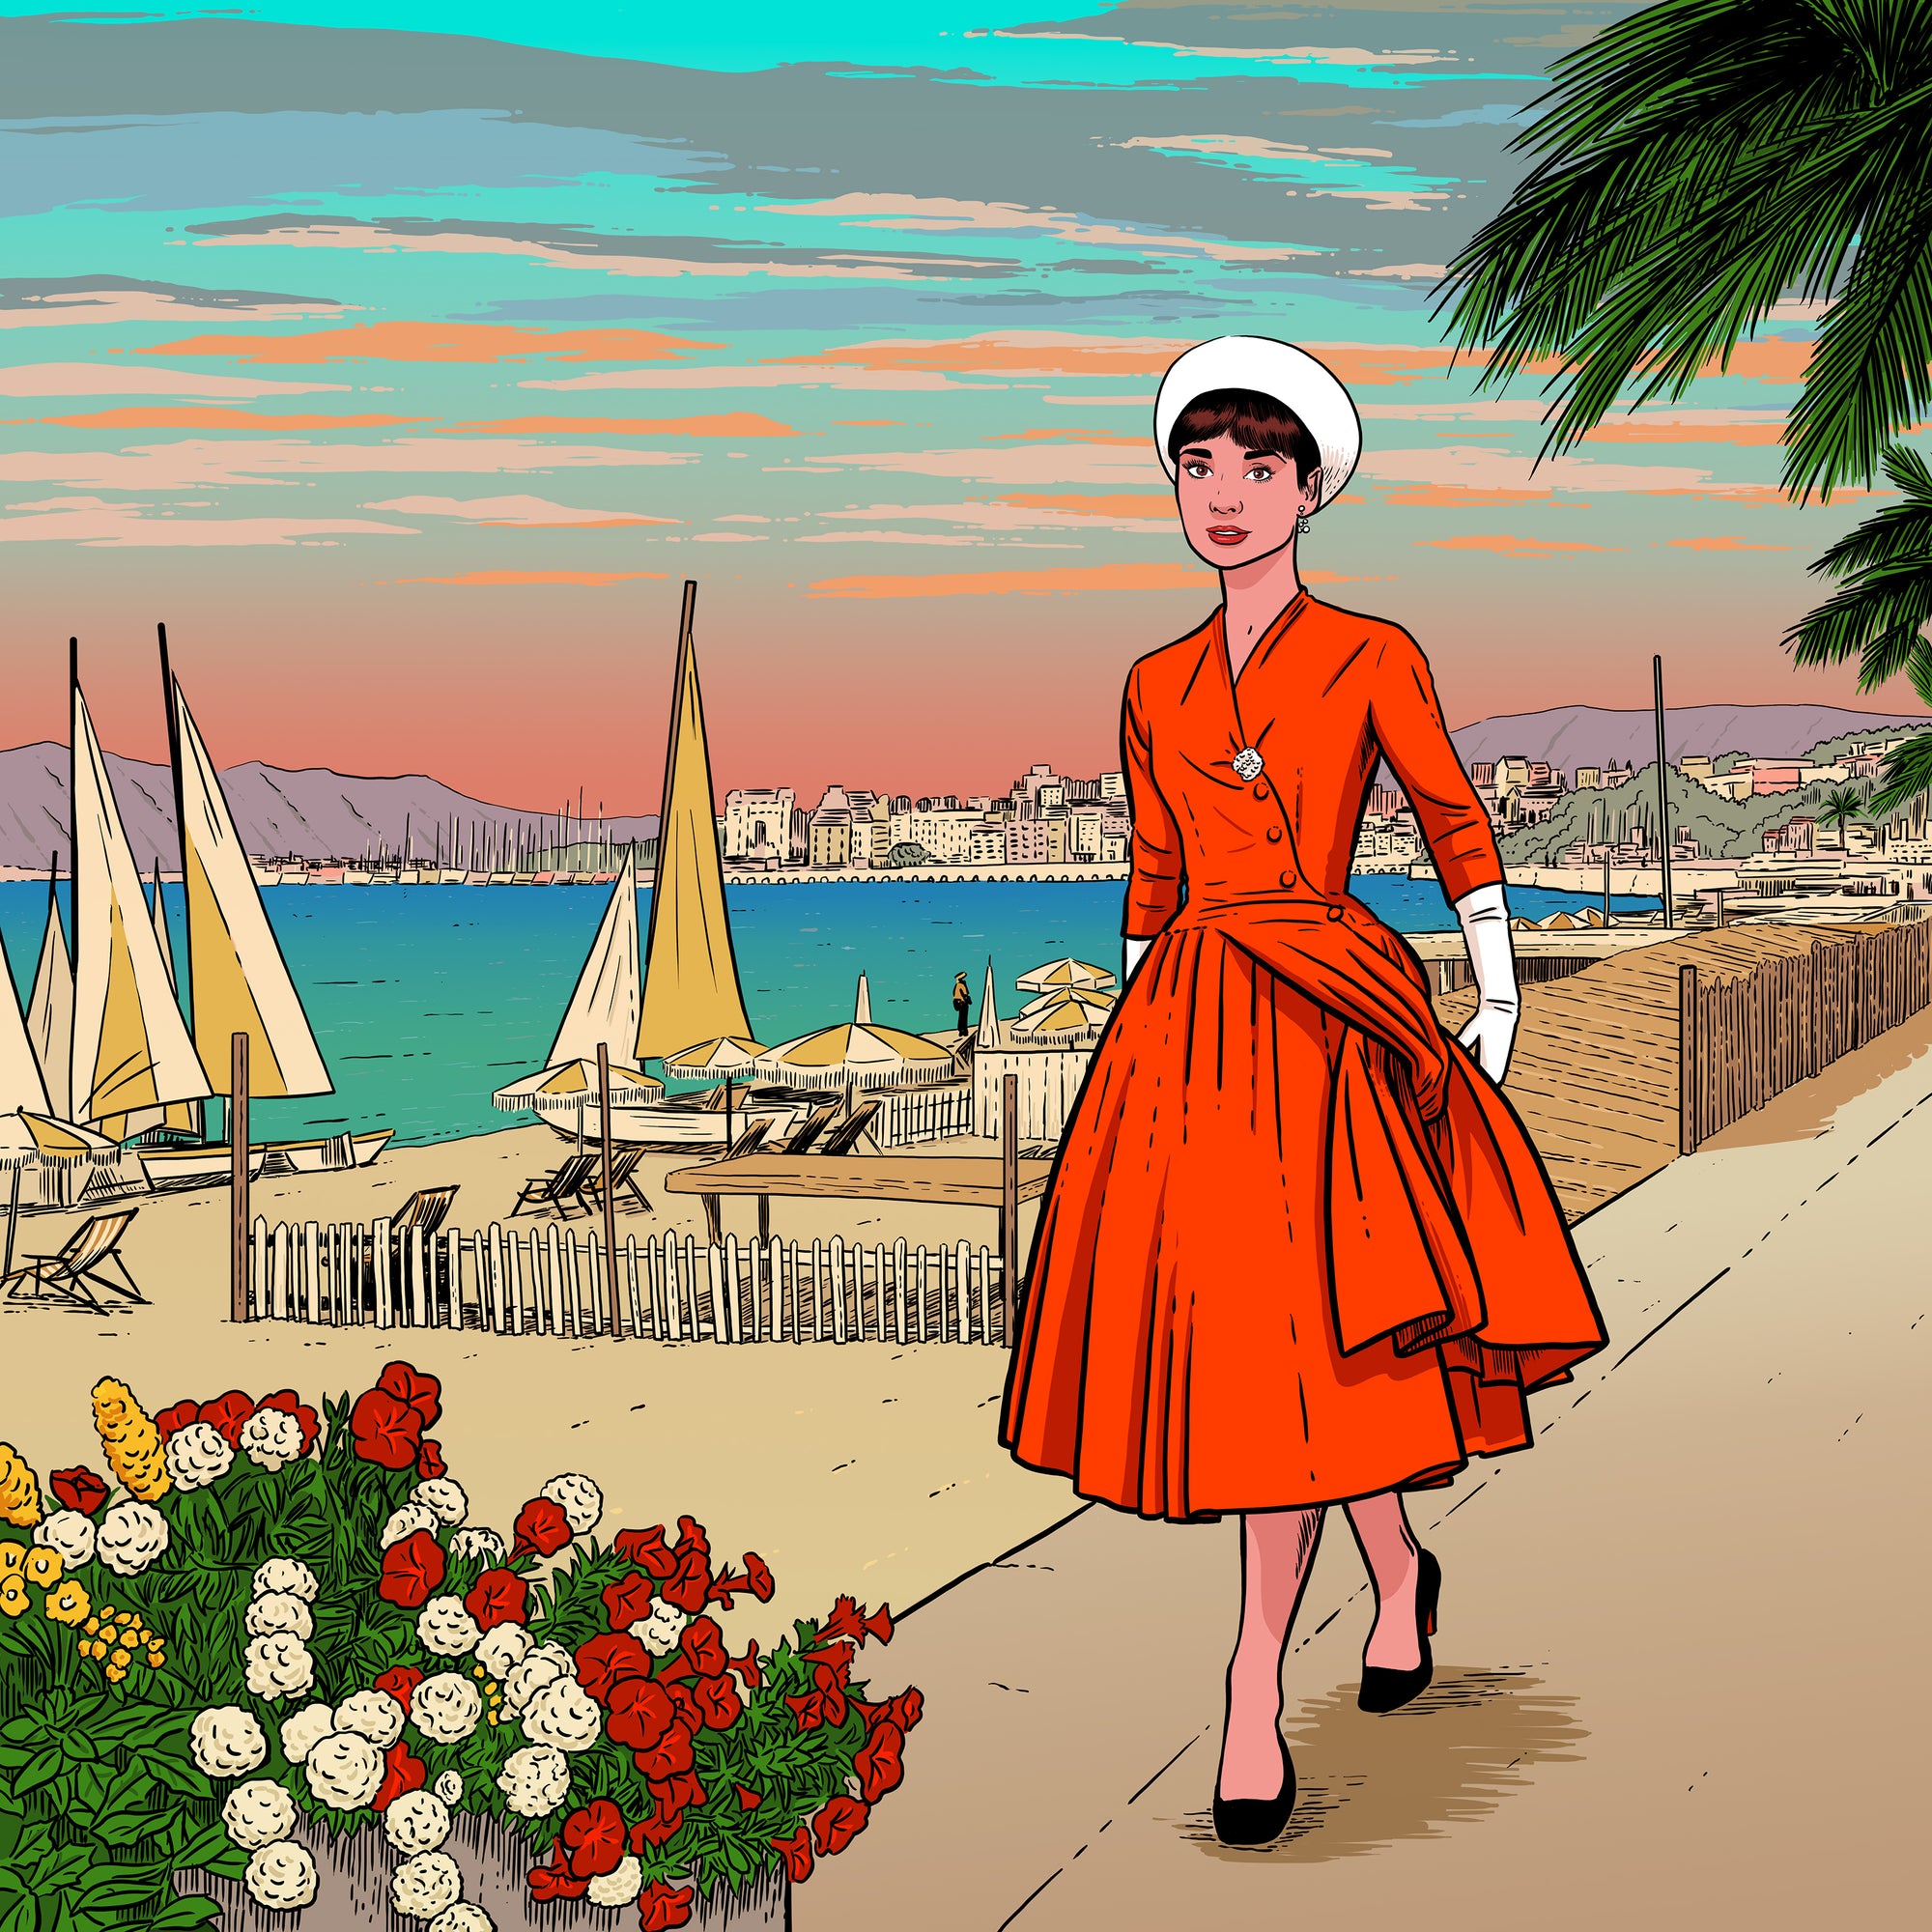 CANNES